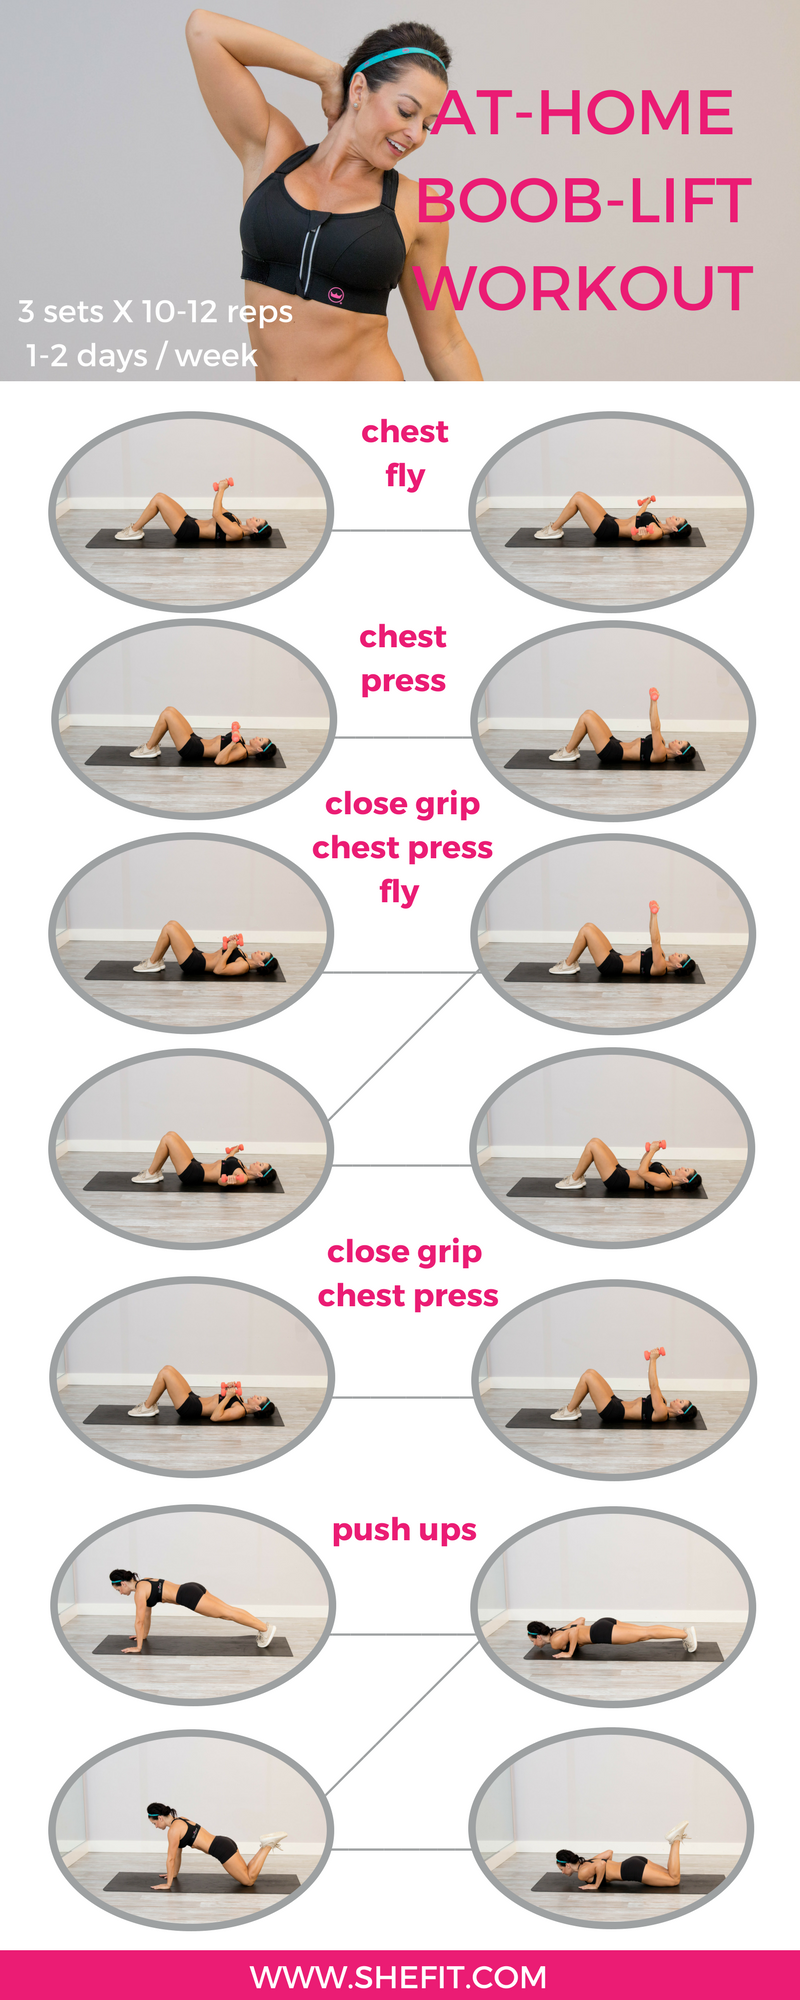 Weight Training Your Chest Muscles Will Enhance The Look Of Your Breasts So If You Re One Of